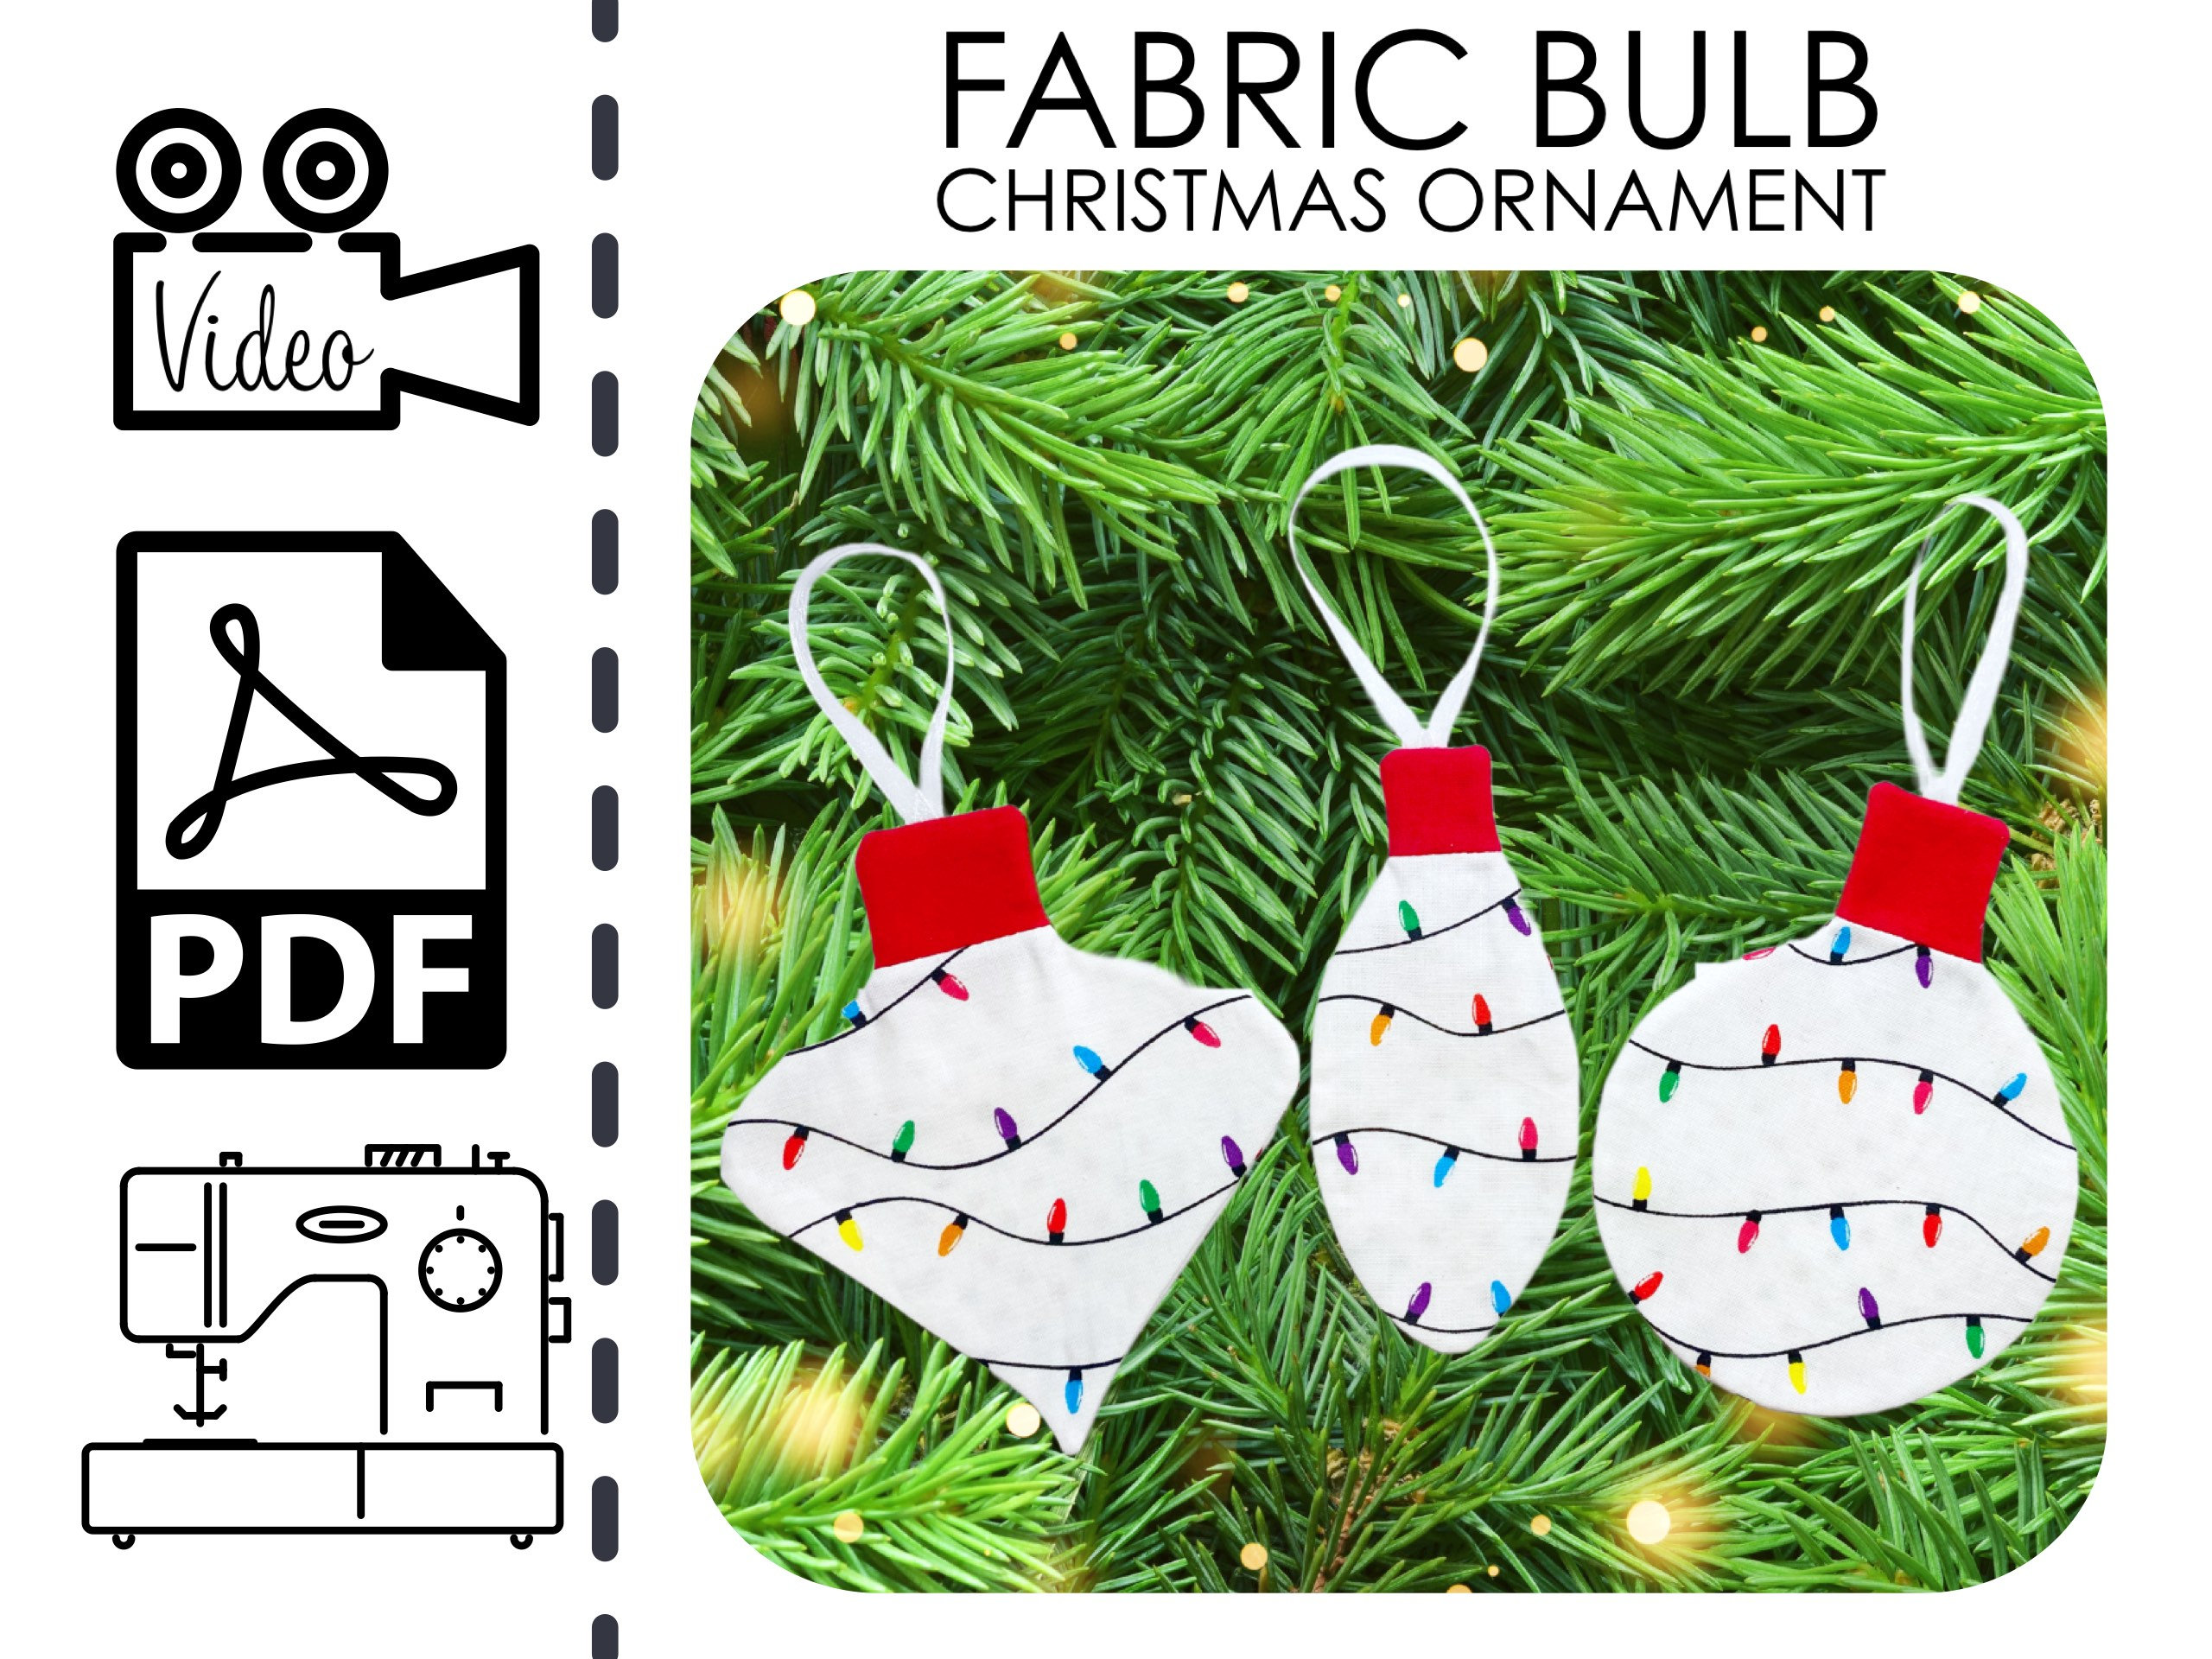 Christmas Tree Bulb Ornaments Bundle Sewing Pattern & VIDEO Tutorial PDF  Easy DIY Holiday Decor Gift to Sew Beginners Sewing Project 